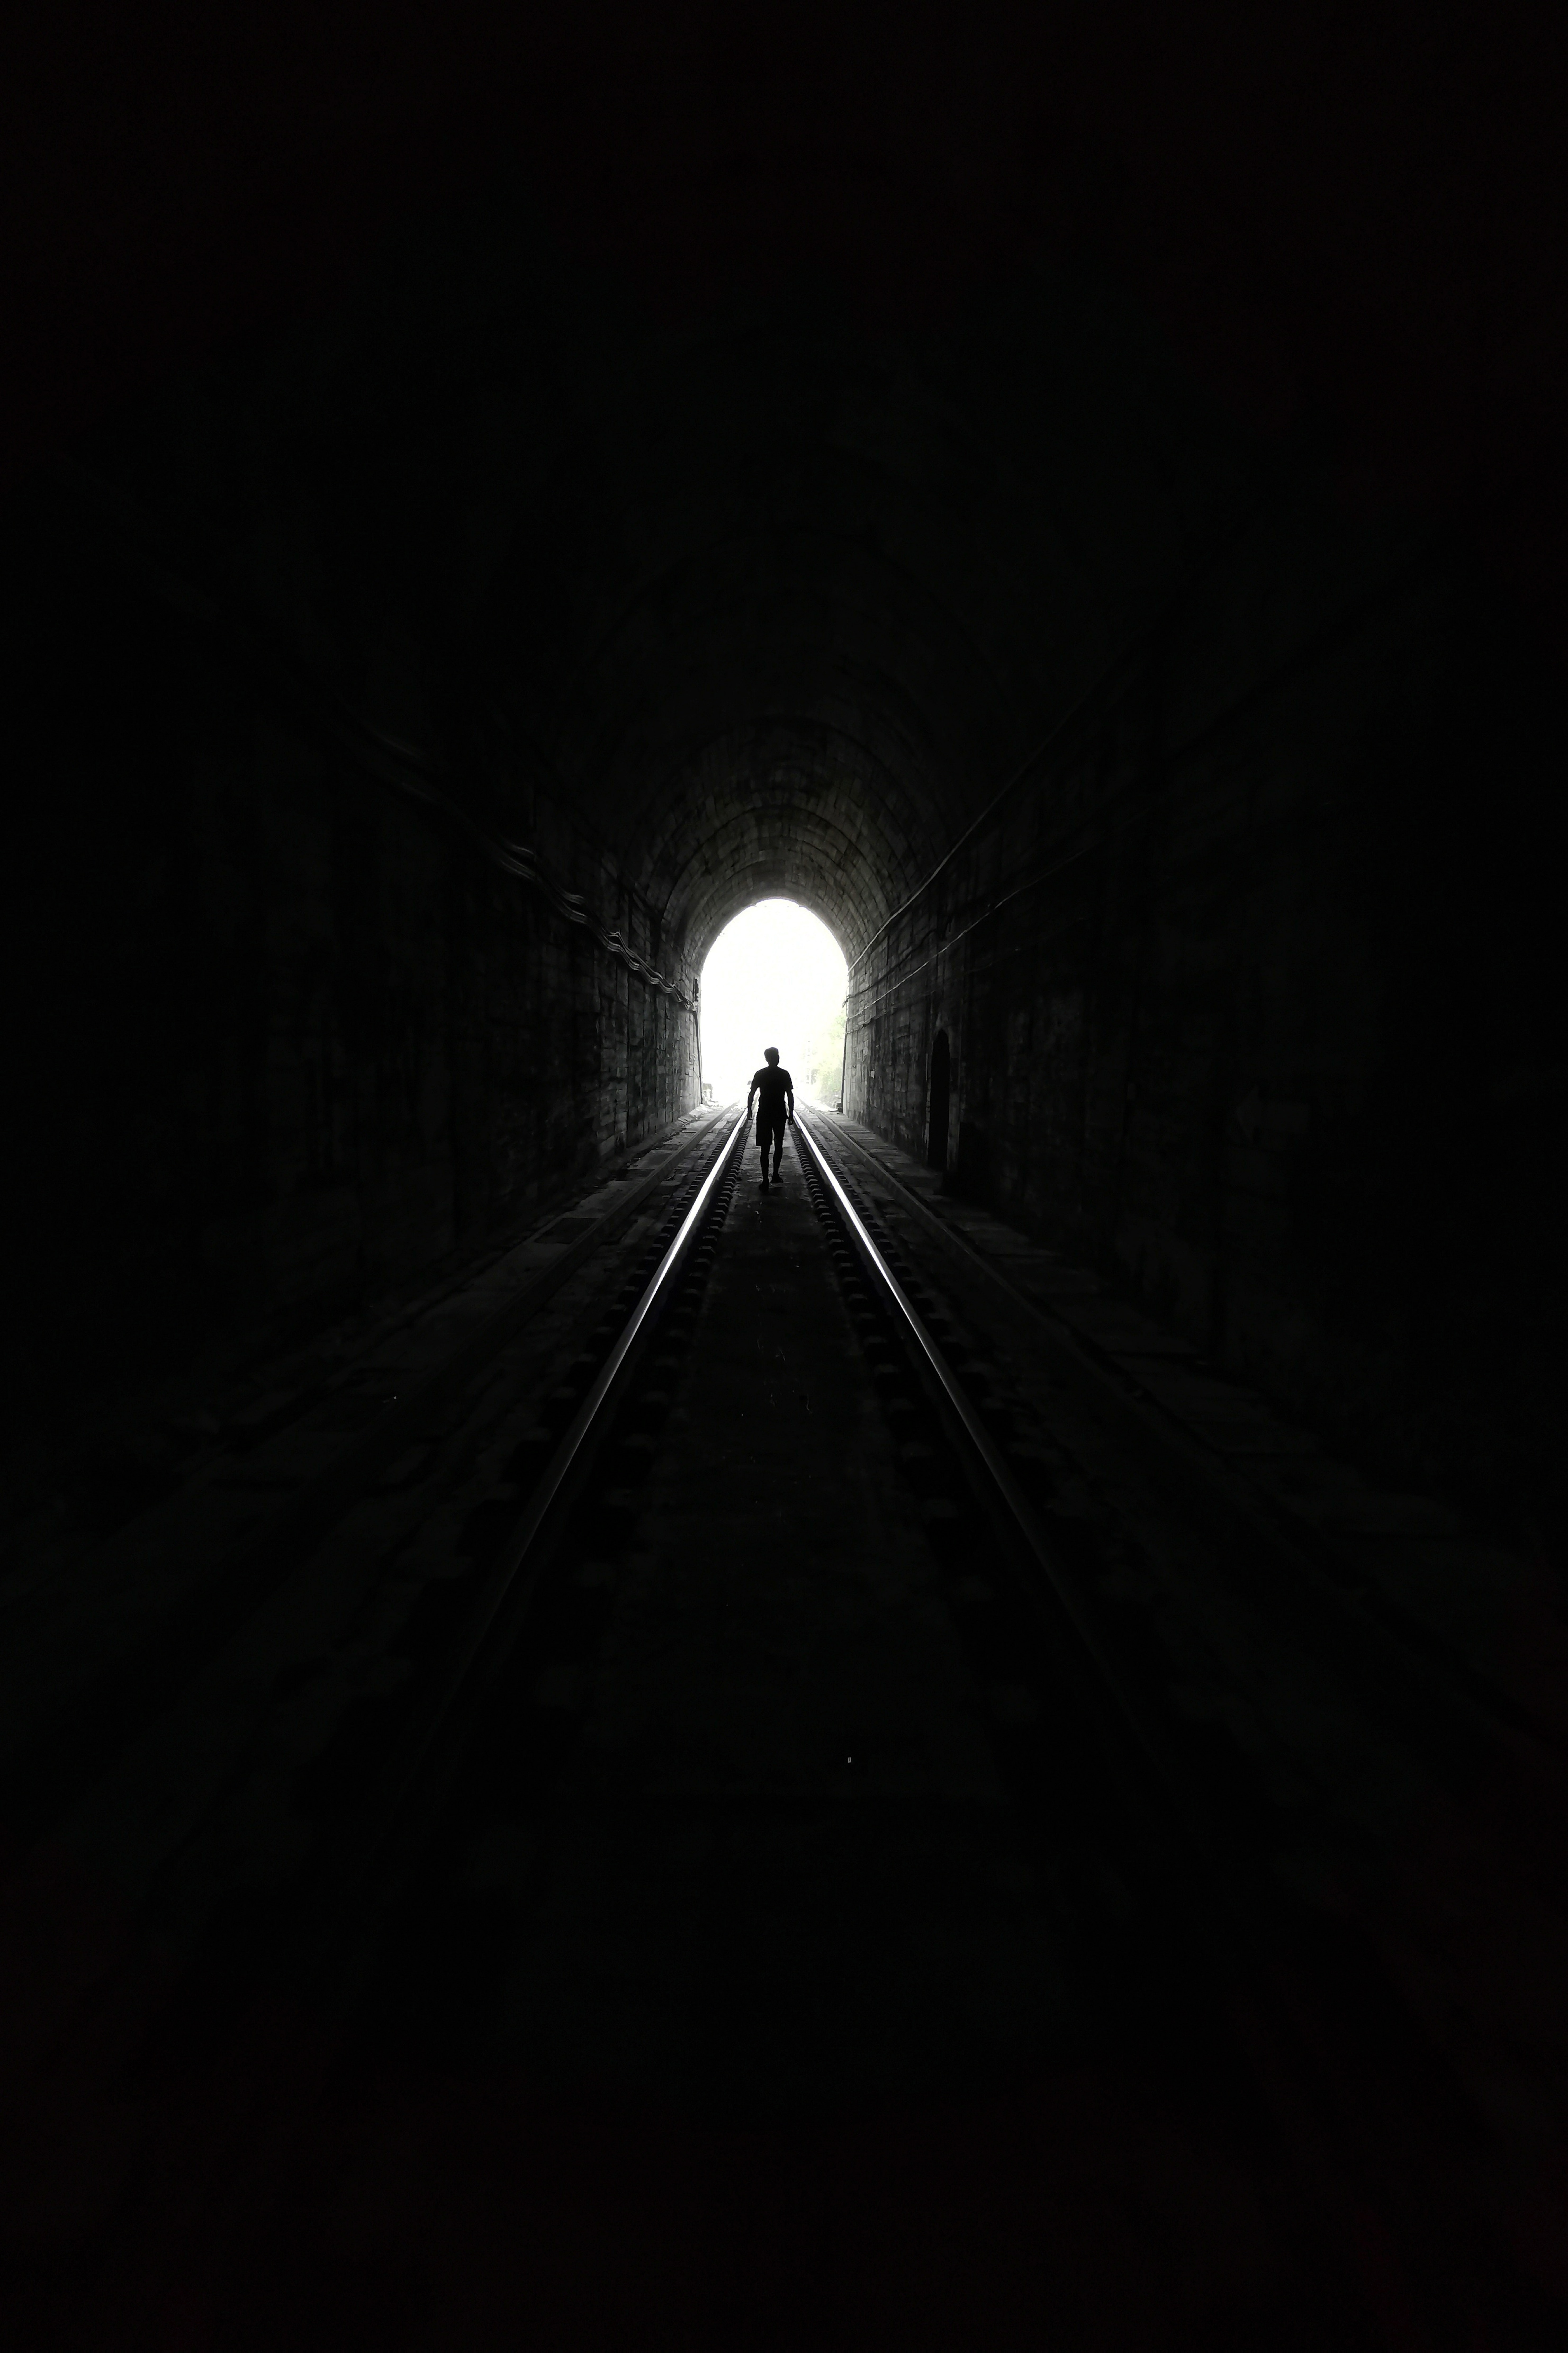 There is light at the end of the tunnel